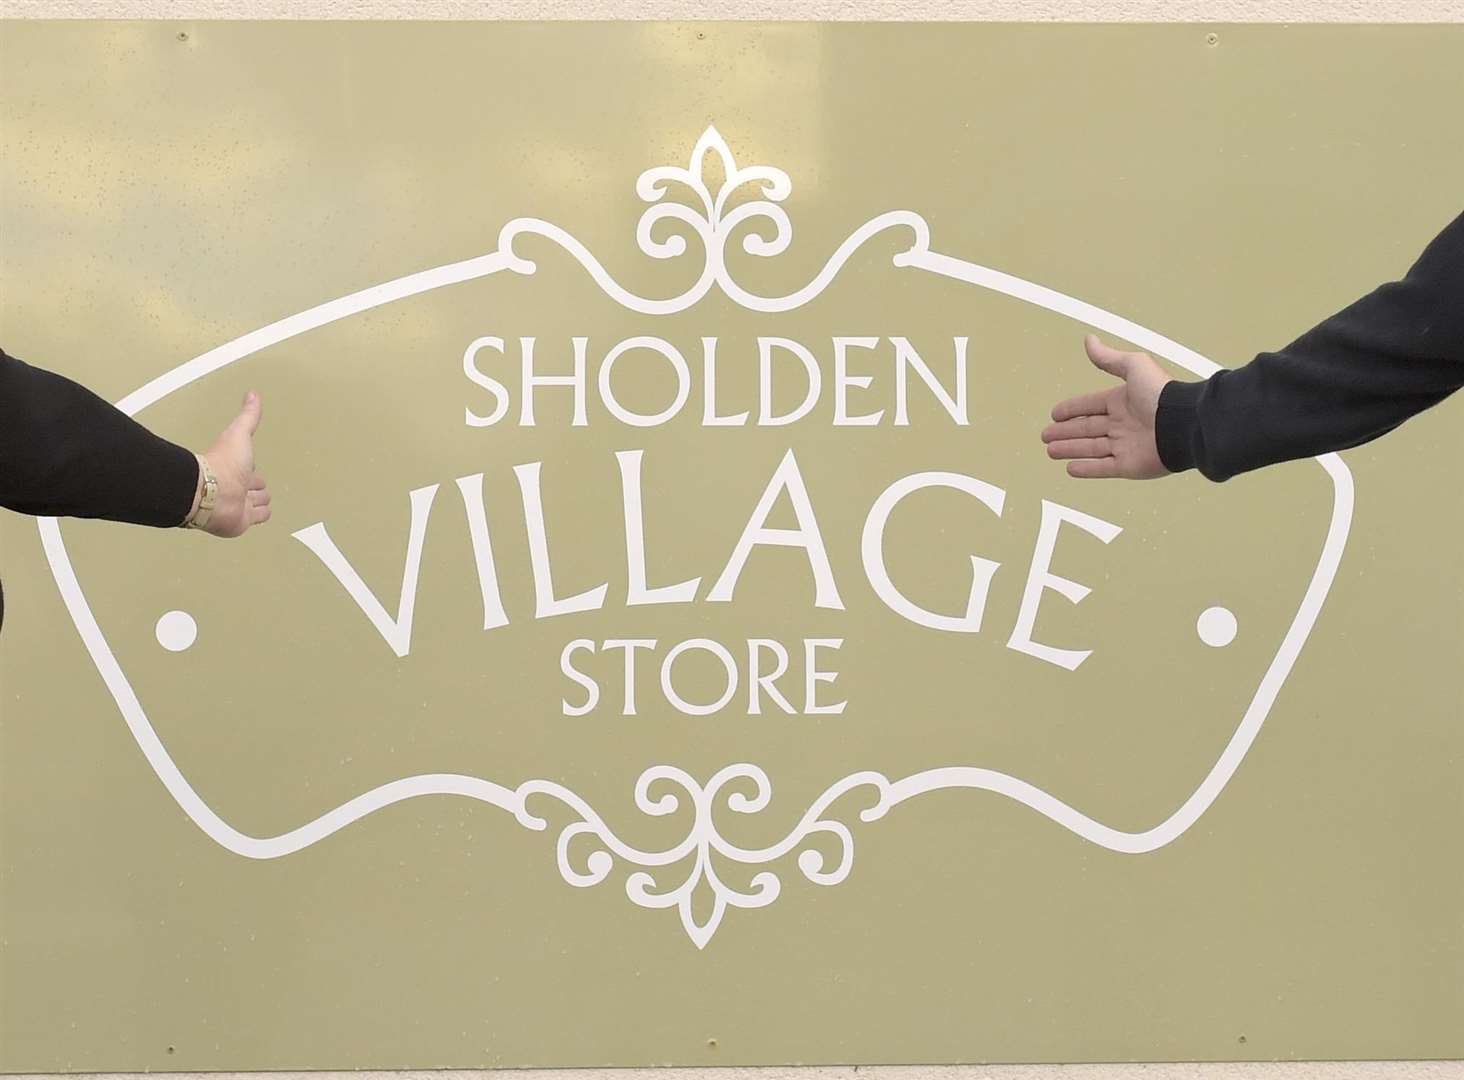 Sholden Village Store opened two years ago this month